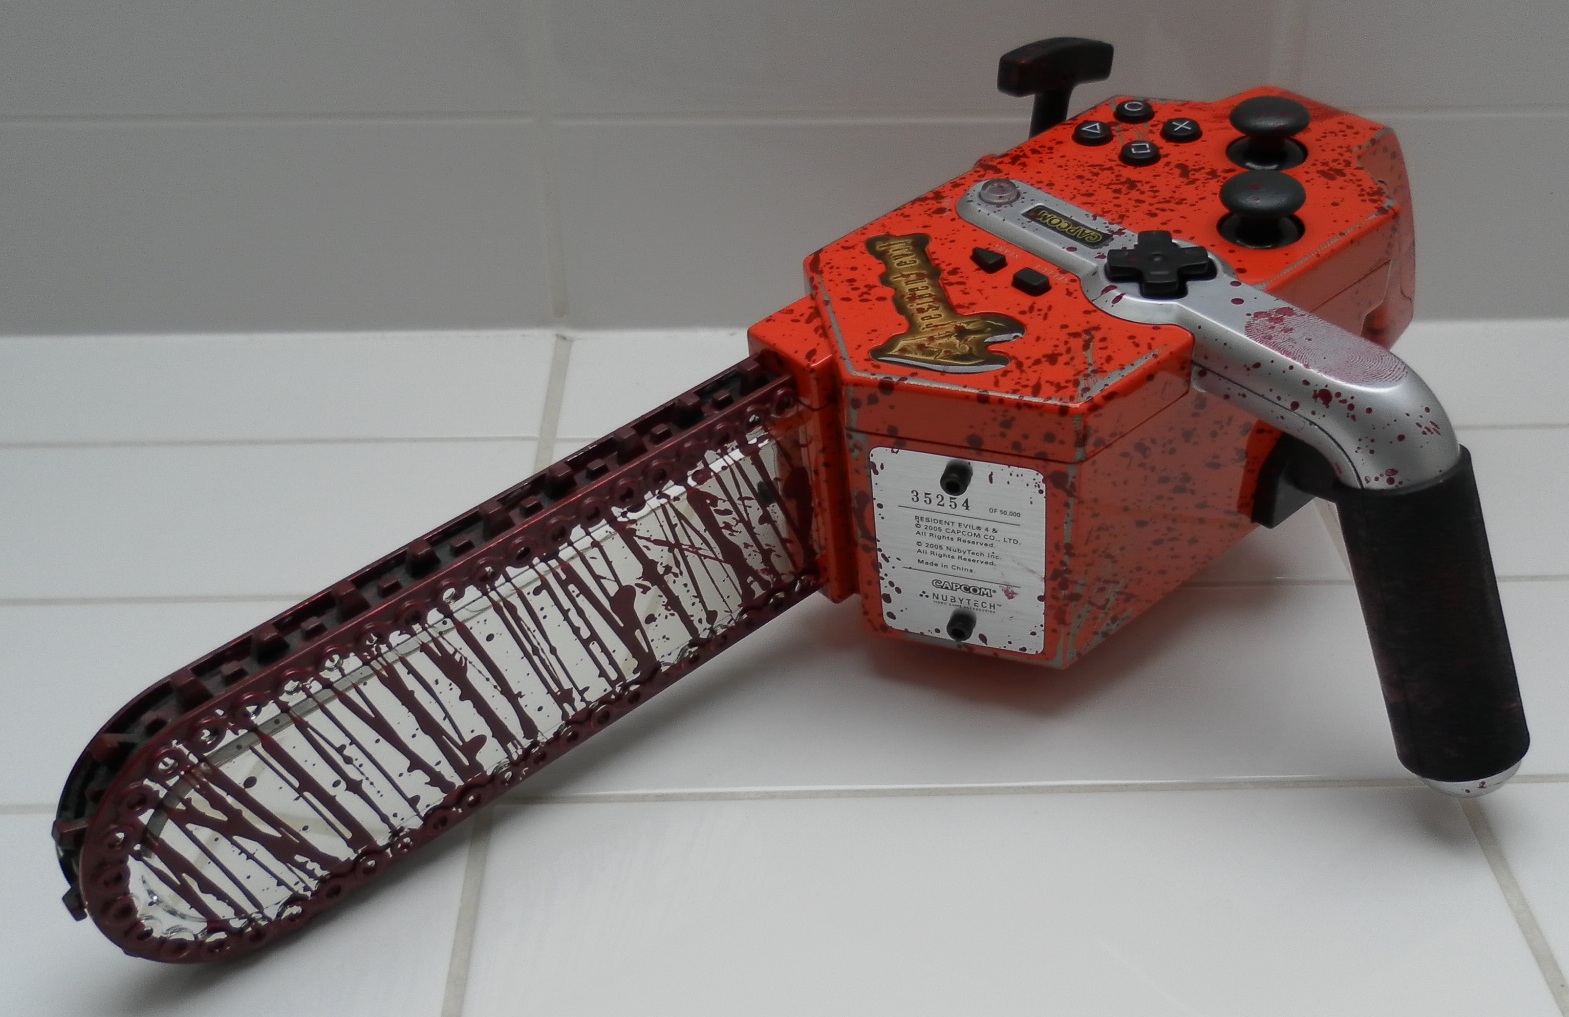 The Resident Evil Chainsaw accessory GameCube